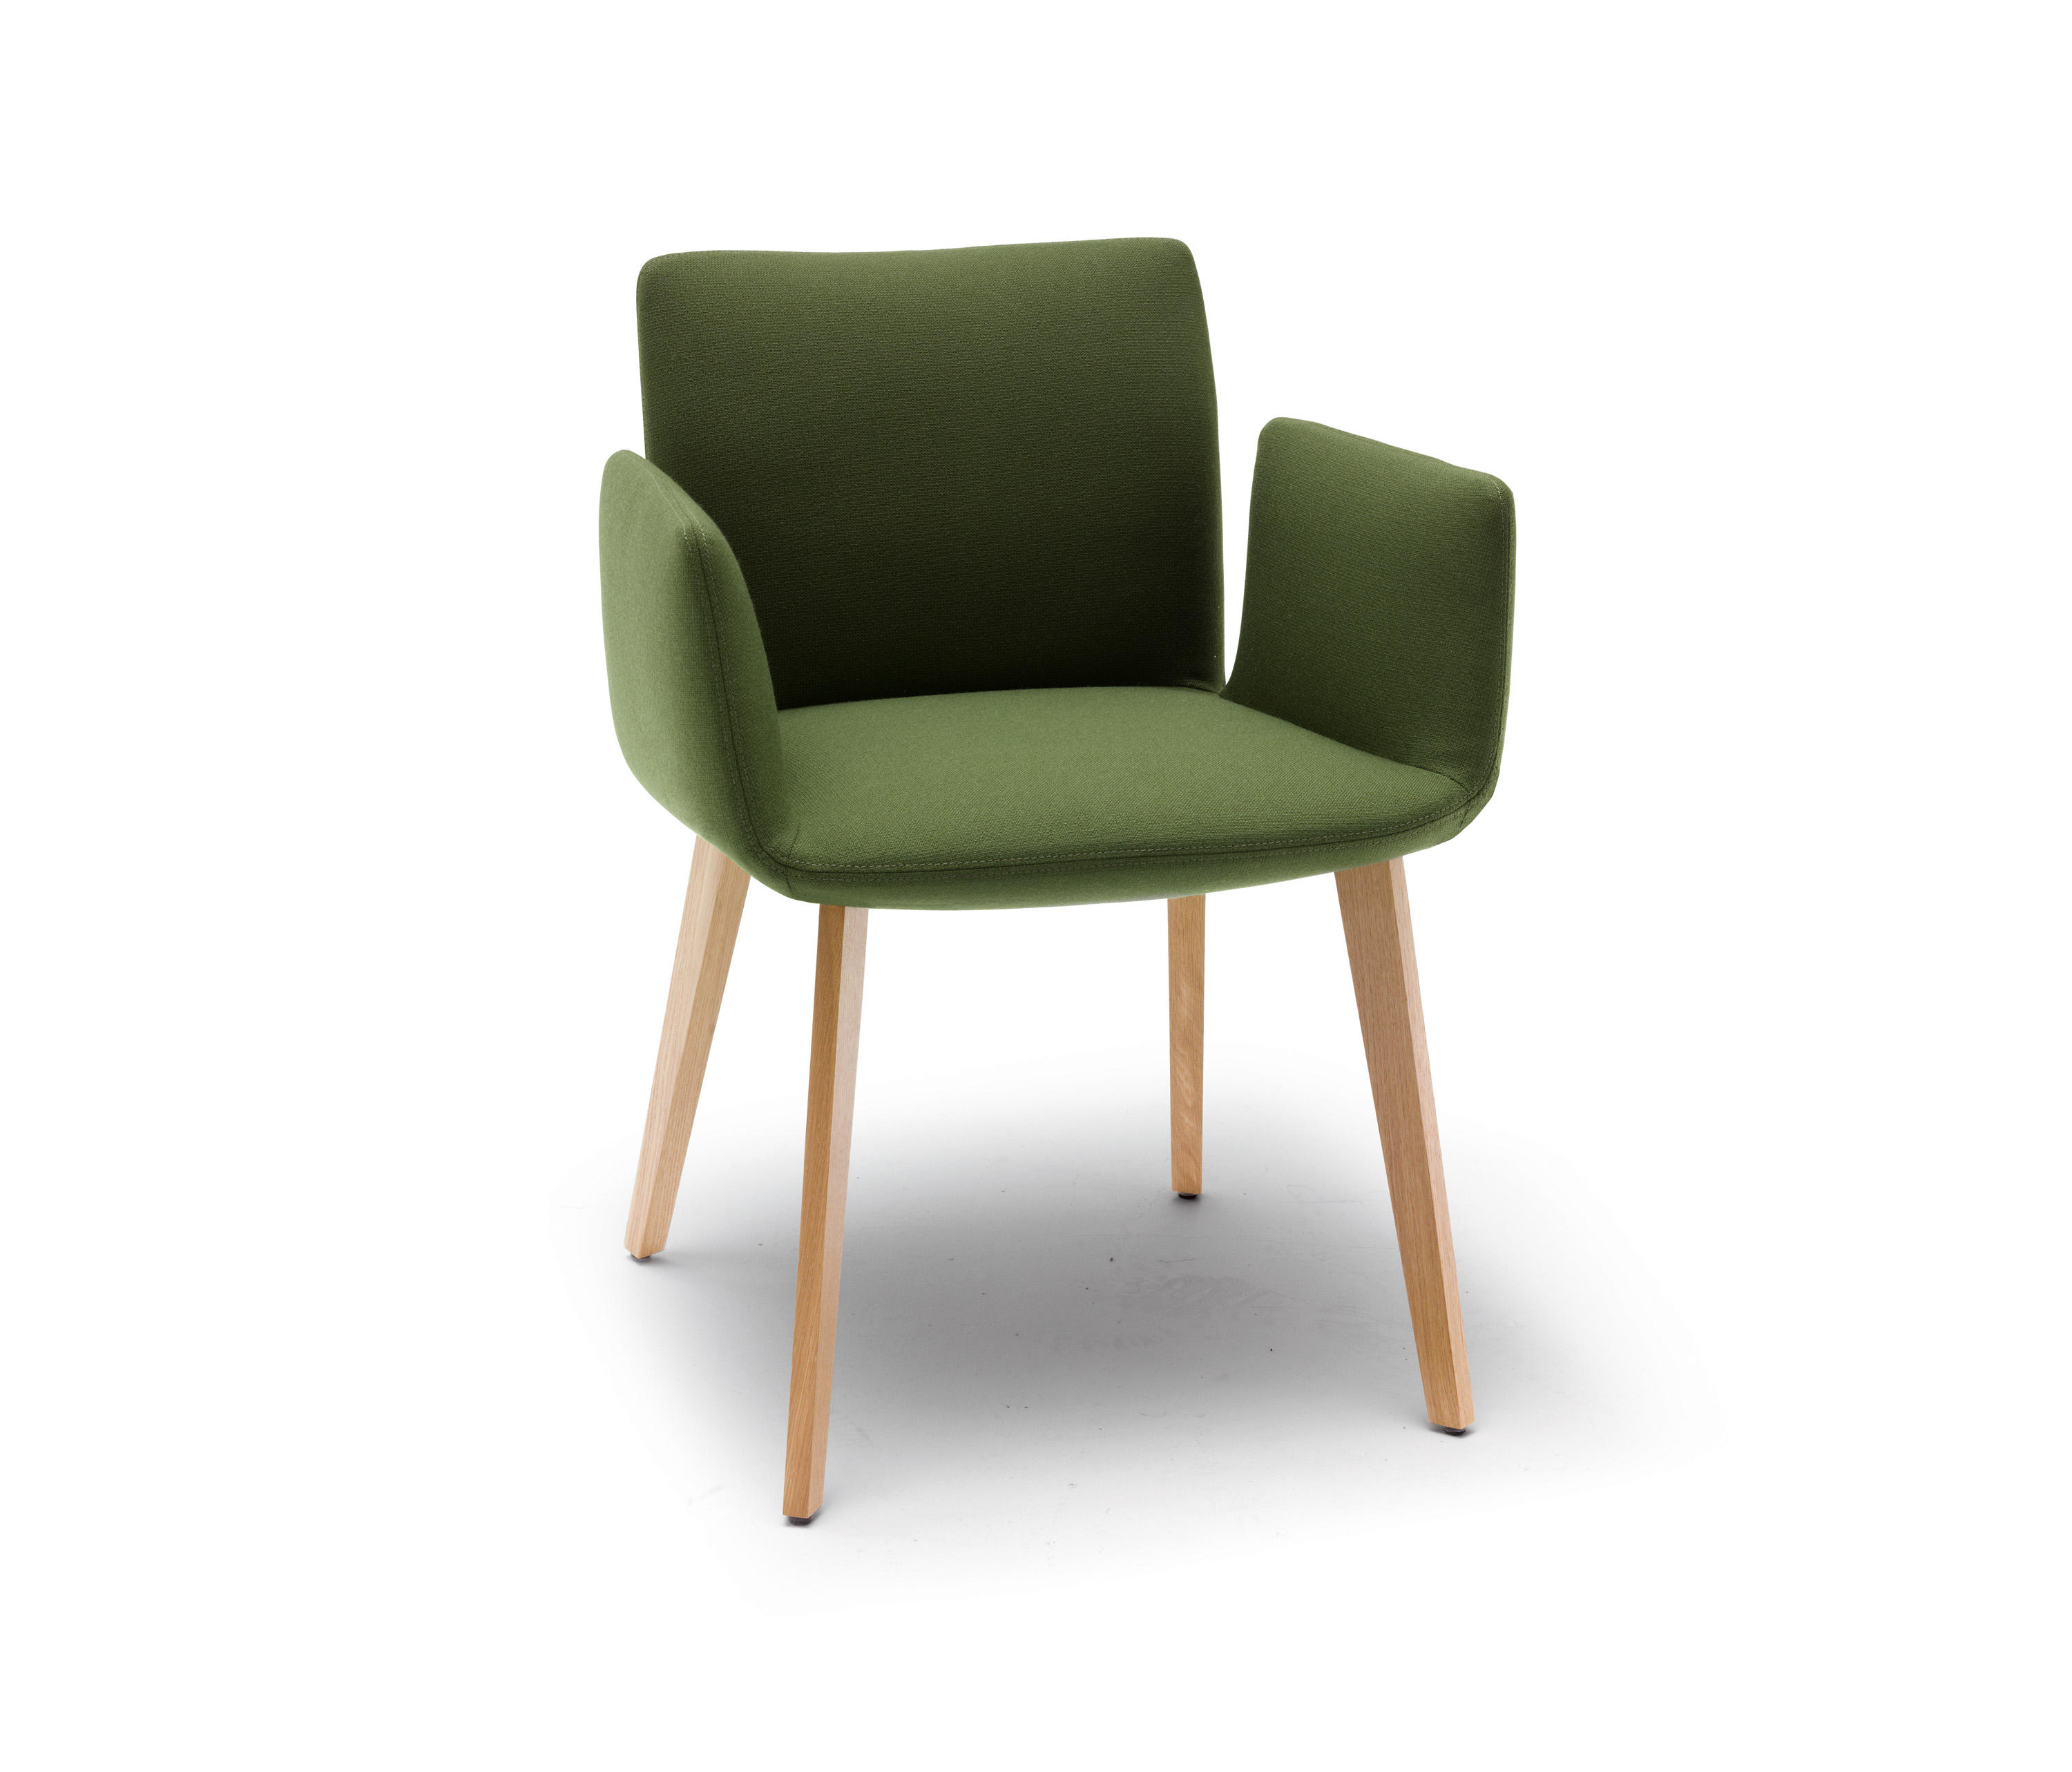 JALIS - Chairs from COR | Architonic